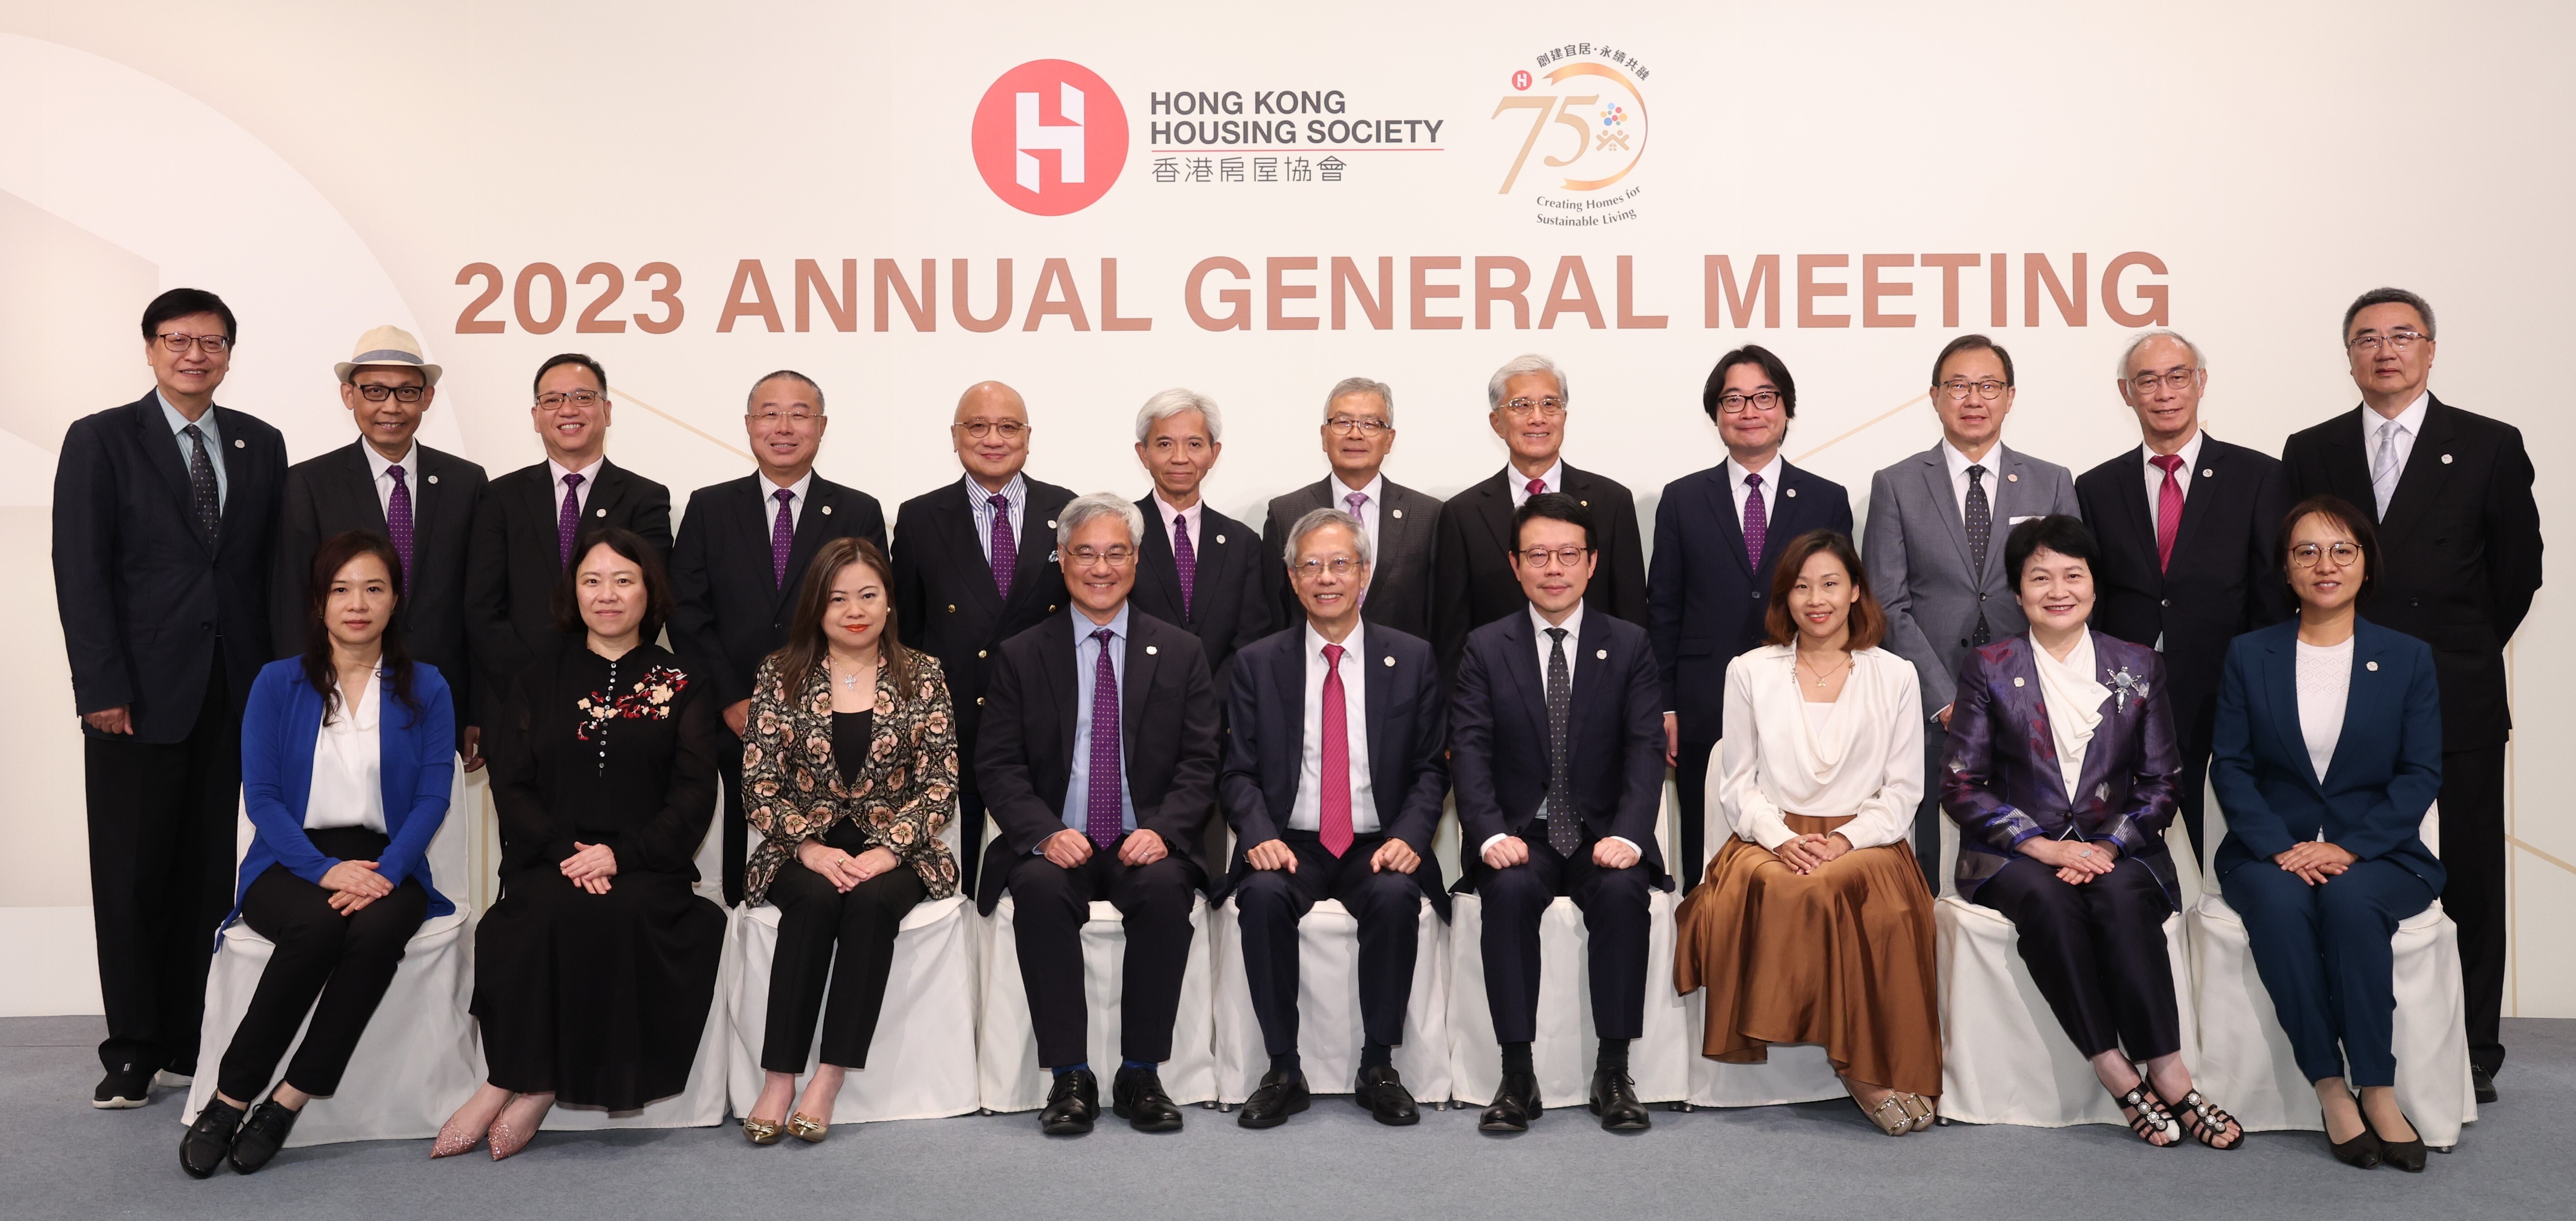 The Hong Kong Housing Society (HKHS) convened the 71st Annual General Meeting (AGM) today (25 September), at which members of the new-term Supervisory Board were elected.  Following the AGM, the Supervisory Board held its first meeting and members of the new-term Executive Committee were appointed.